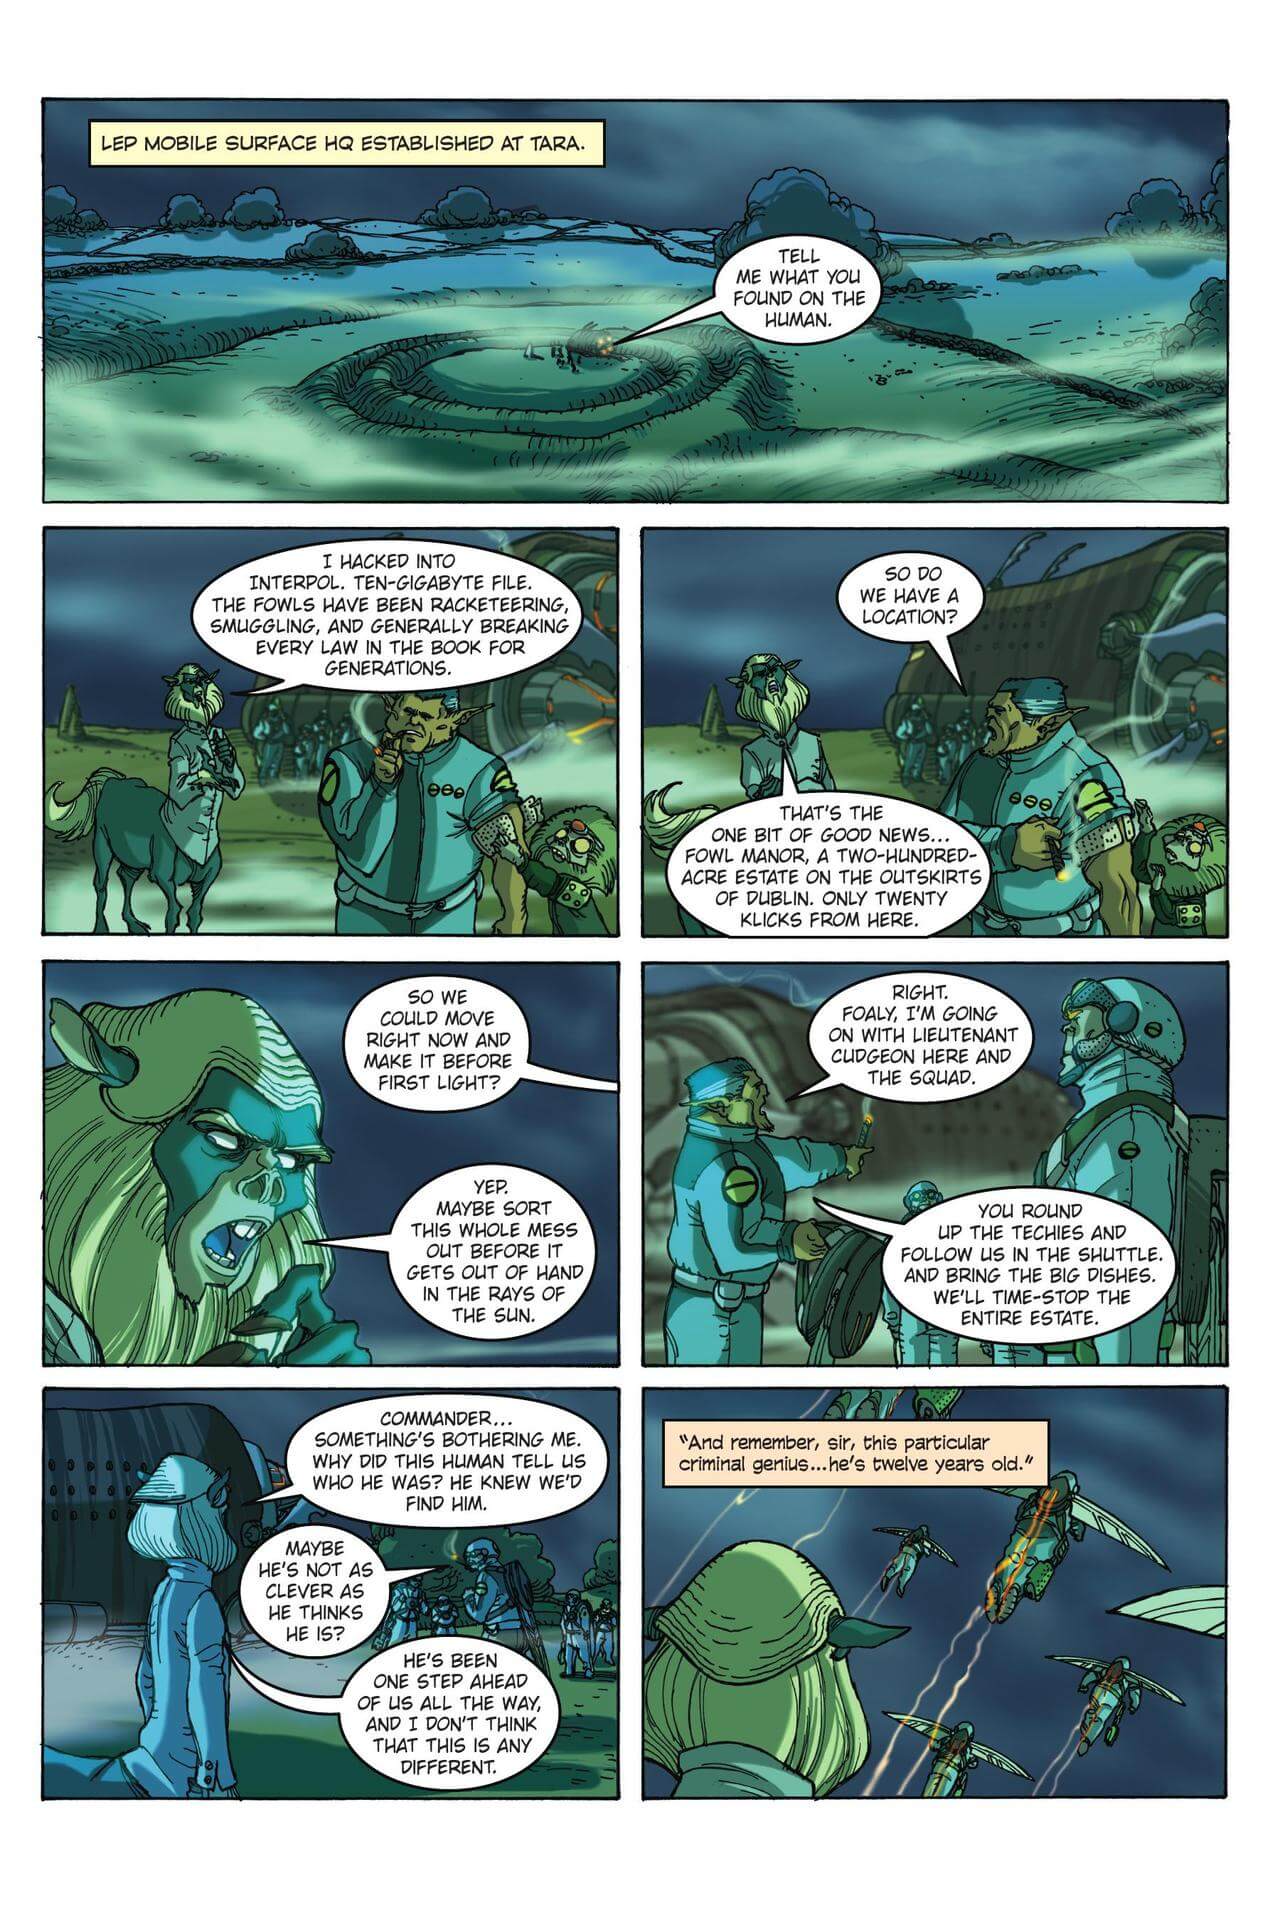 page 50 of artemis fowl the graphic novel